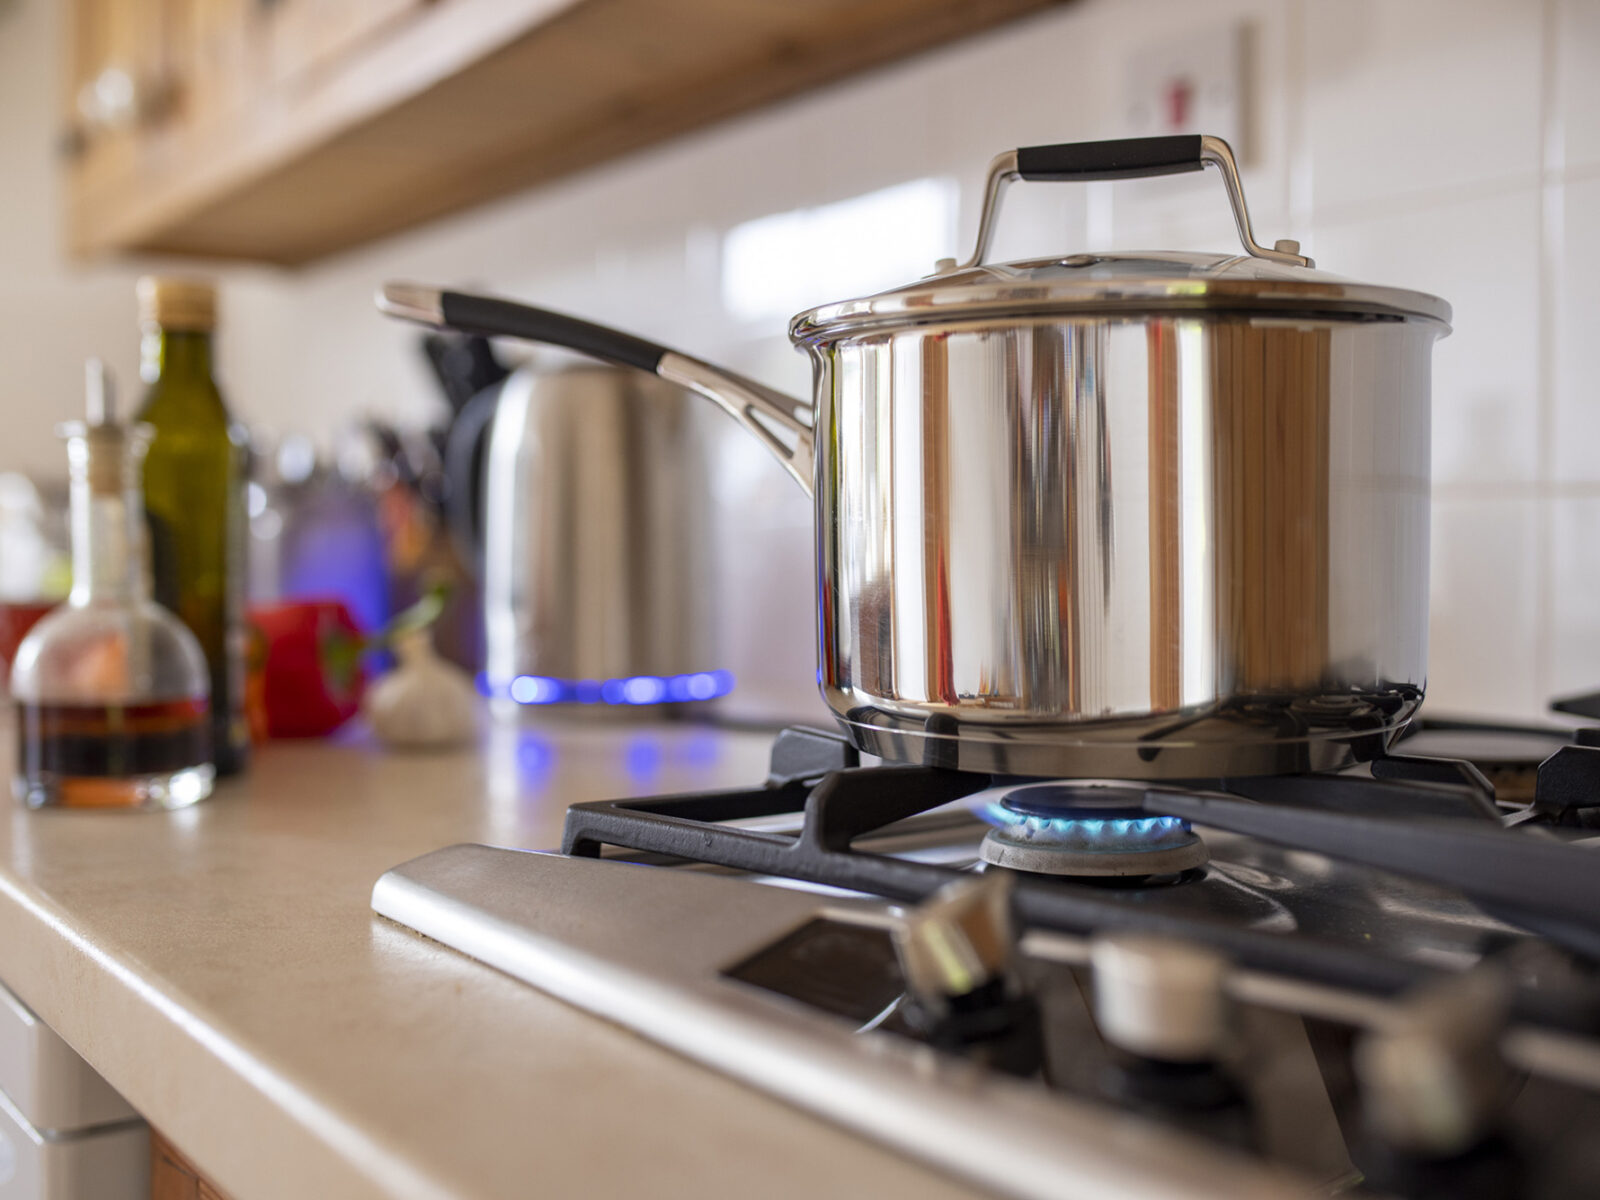 Should You Replace Your Gas Stove?, The Brink